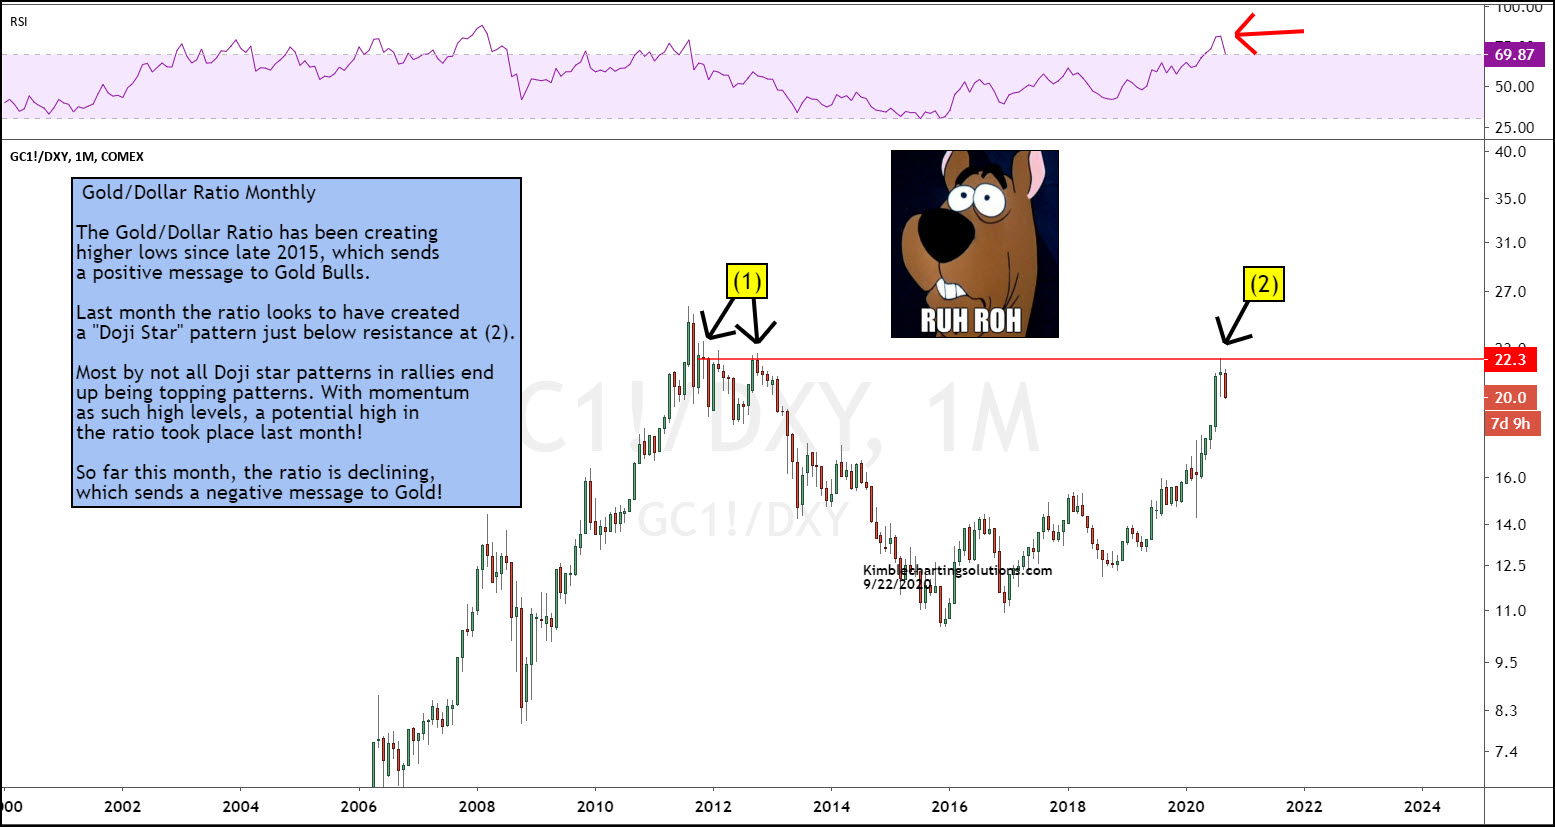 Gold / Dollar Ratio Monthly Chart